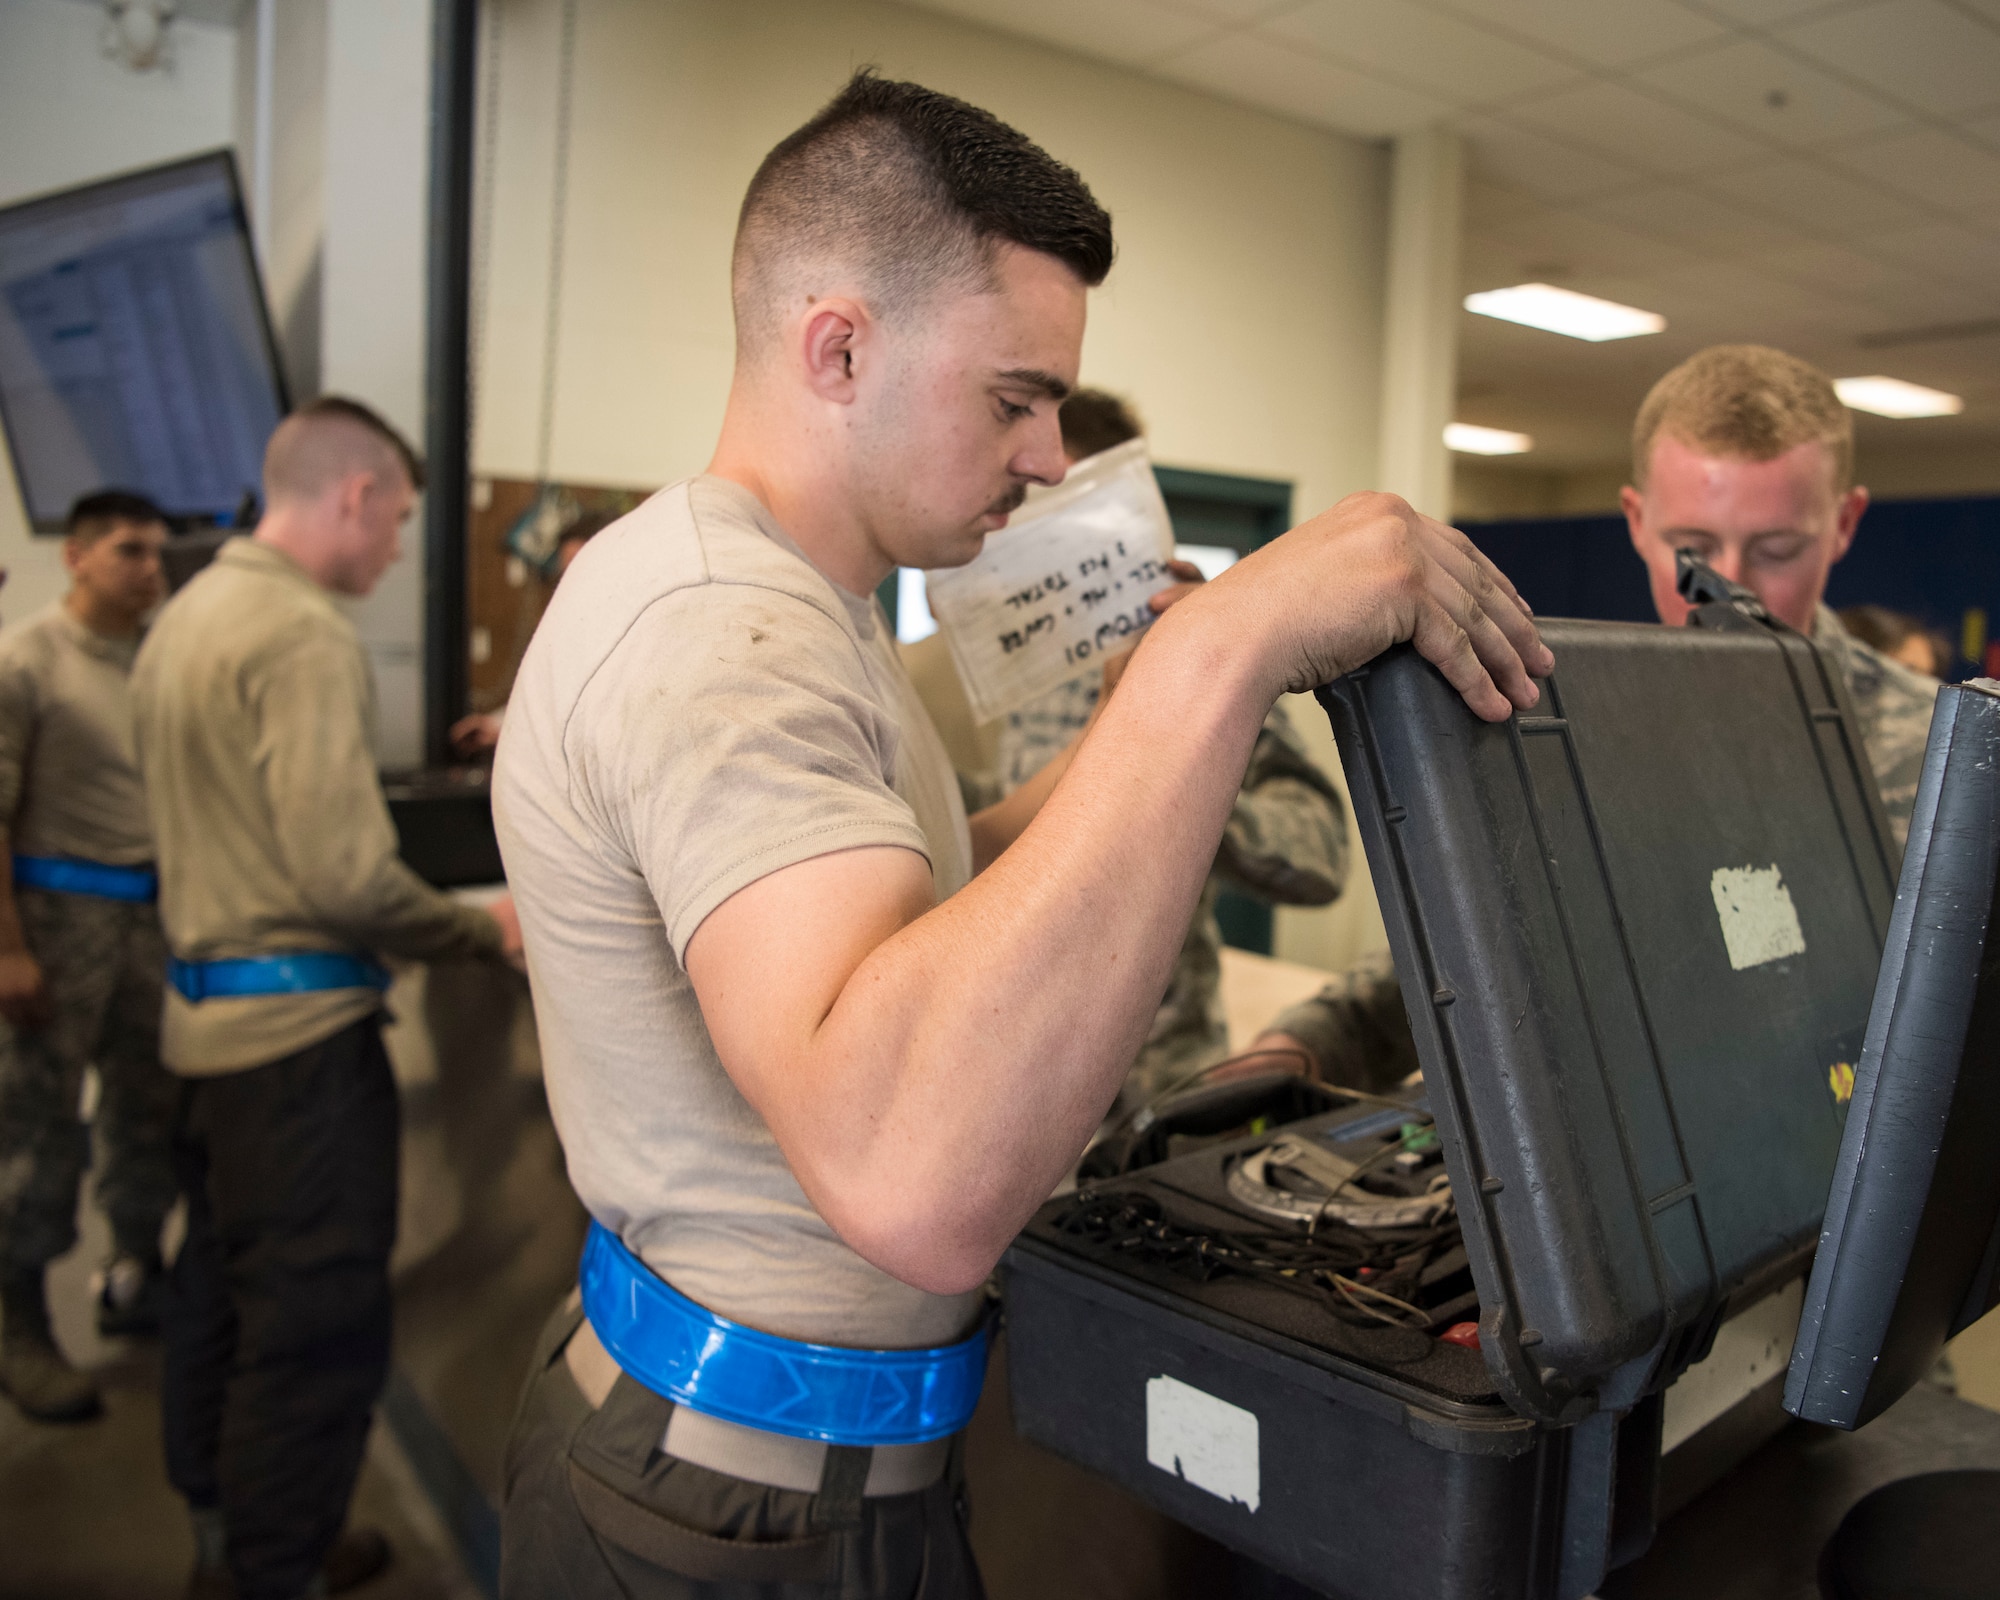 Airman 1st Class Ian Pierce, a 525th Aircraft Maintenance Unit F-22 Raptor assistant dedicated crew chief, turns in equipment during a tool and equipment shift inventory at Joint Base Elmendorf-Richardson, Alaska, July 19, 2018. Pierce is responsible and accountable for any tools he checks out while performing maintenance on the aircraft.